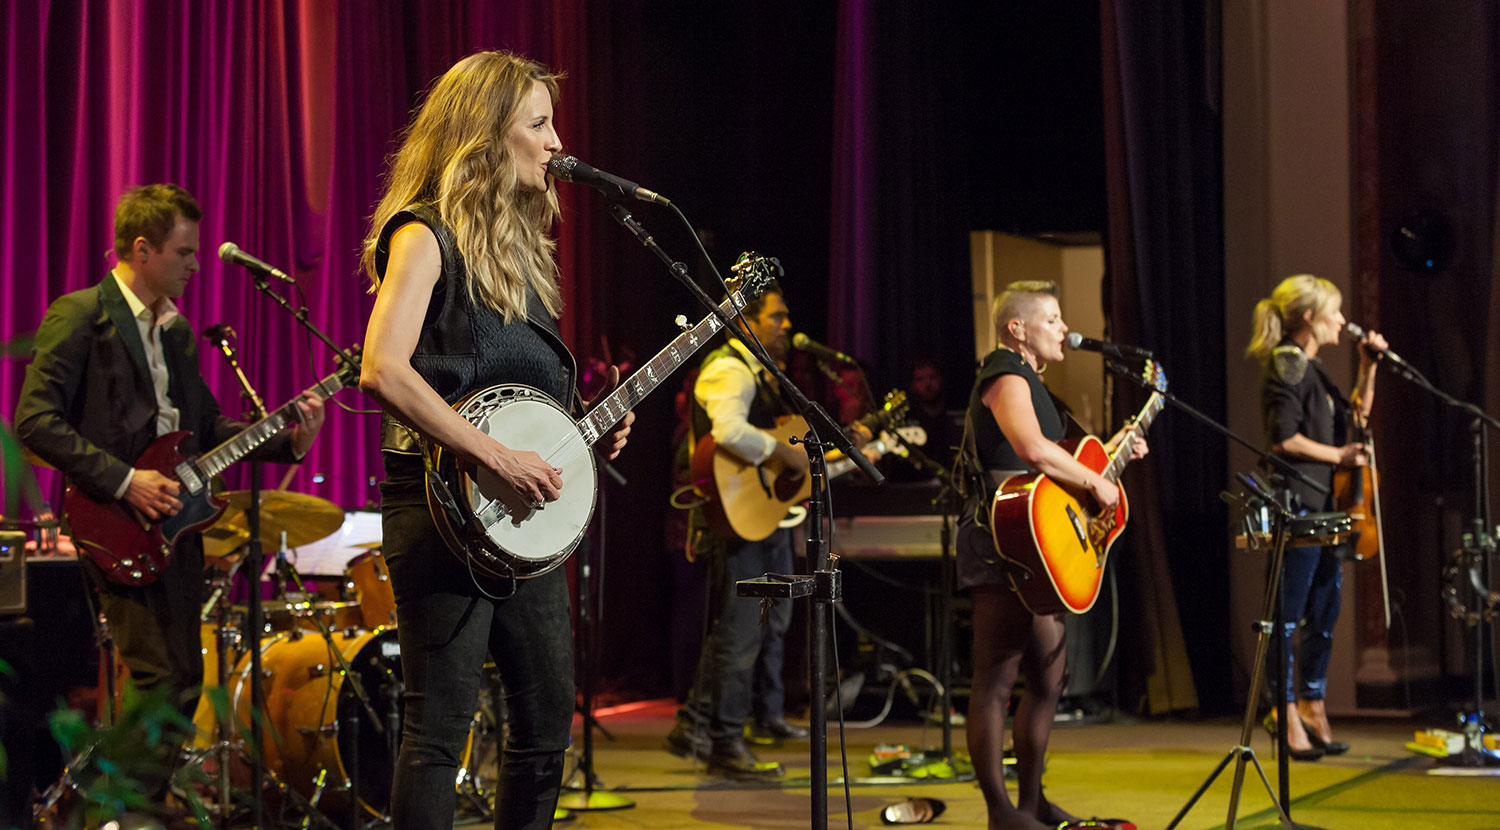 The Dixie Chicks reunite for the first time in three years to honor Mr. Rubin